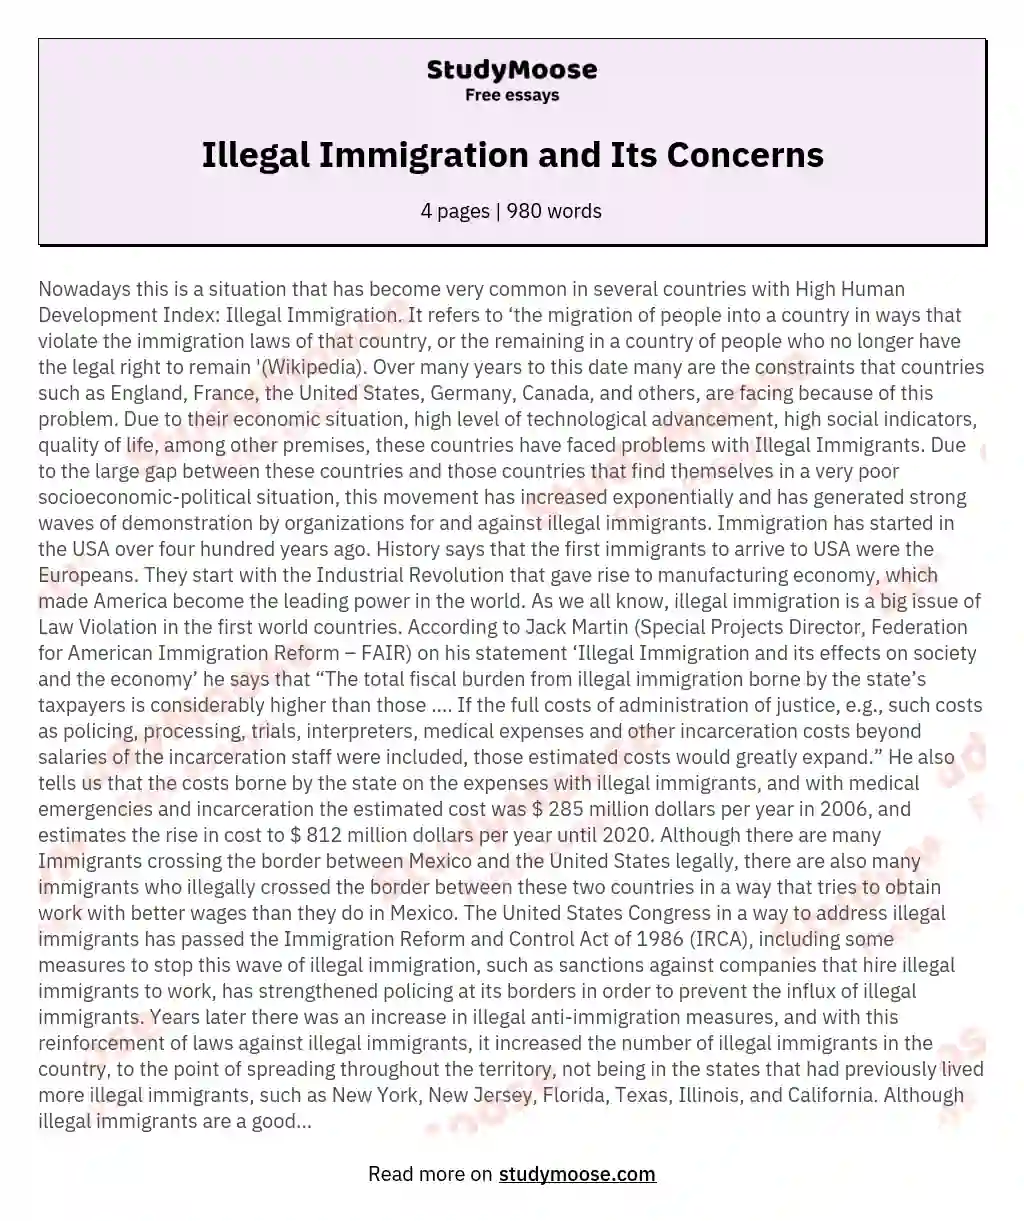 Illegal Immigration and Its Concerns